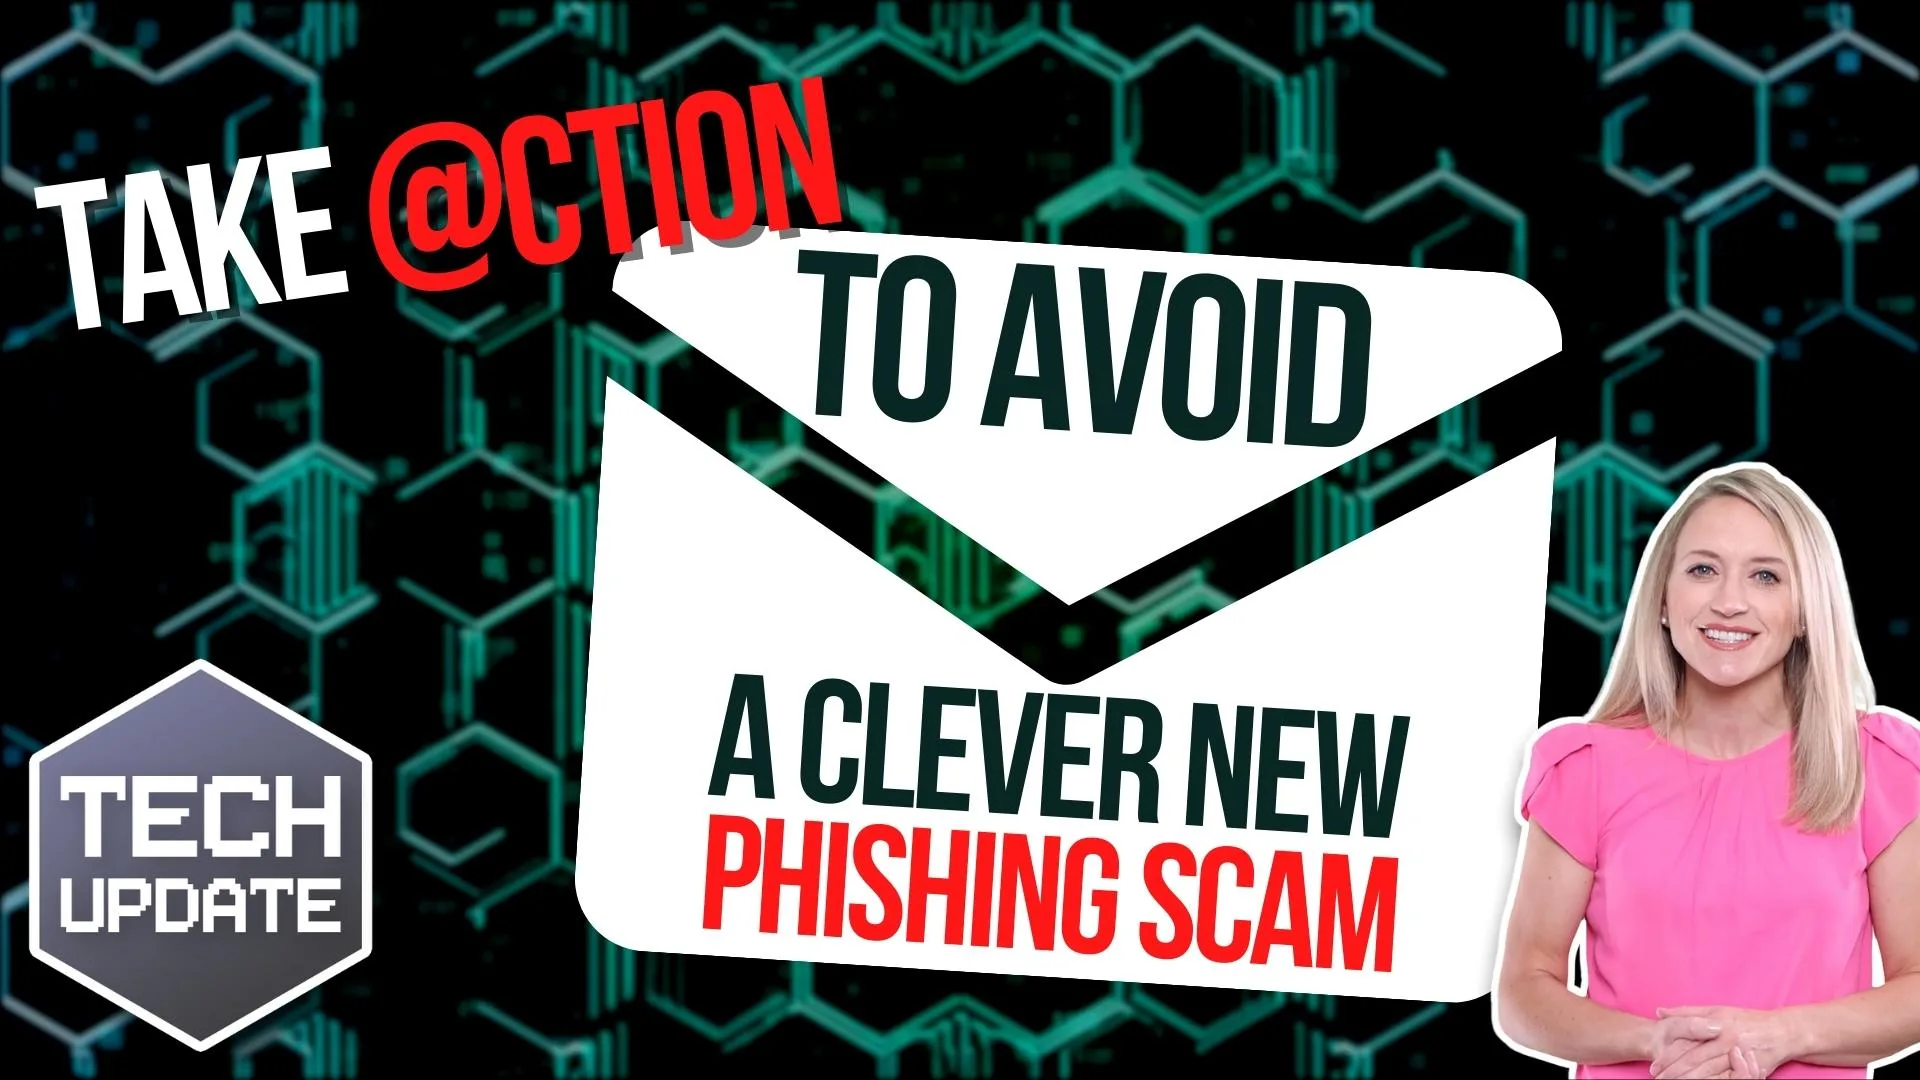 Take action to avoid a clever new phishing scam.